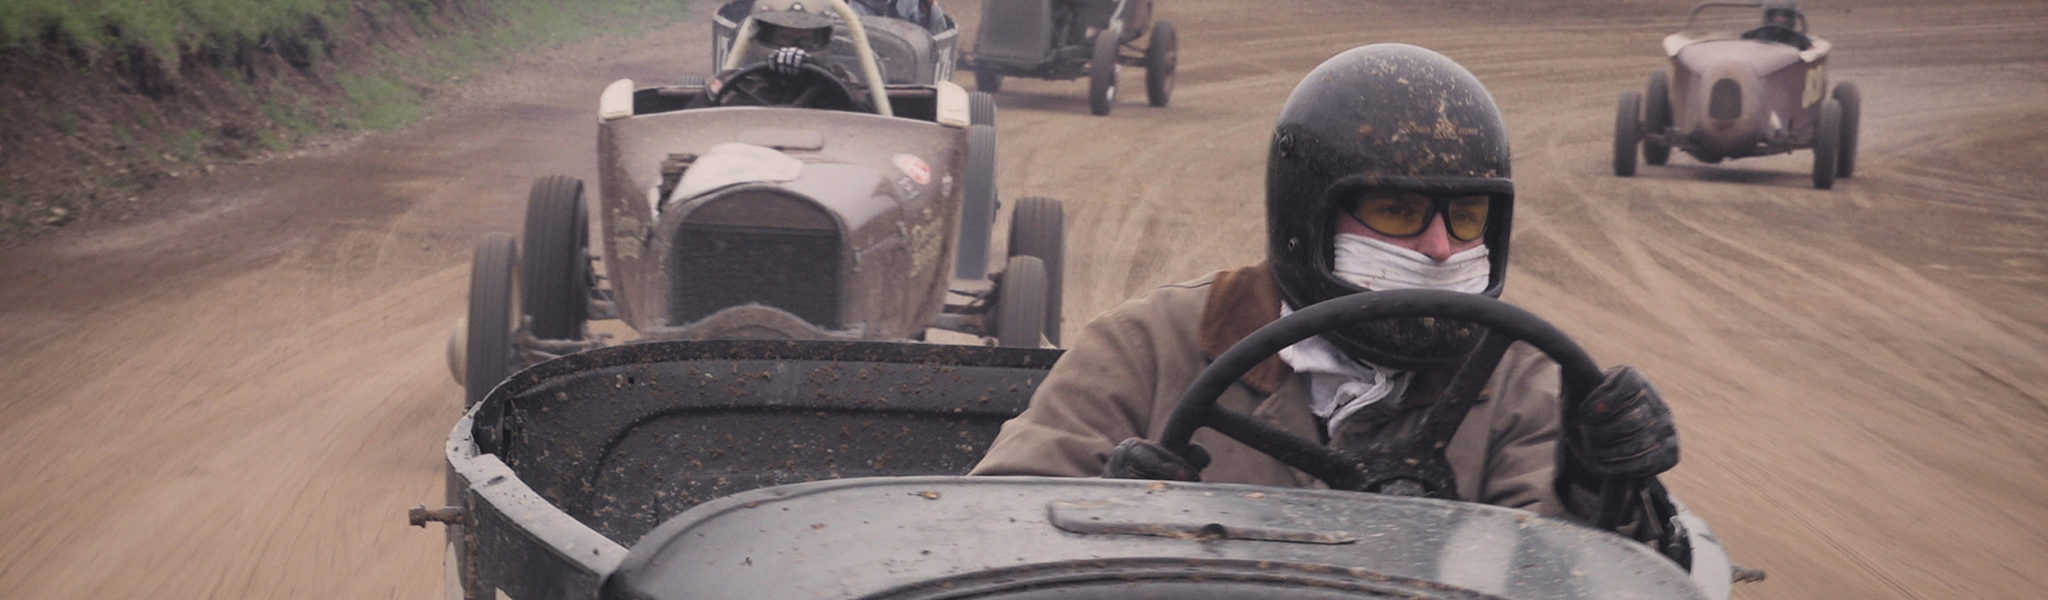 Chasing Vintage race Cars at the Circle M Ranch Speedway Reunion